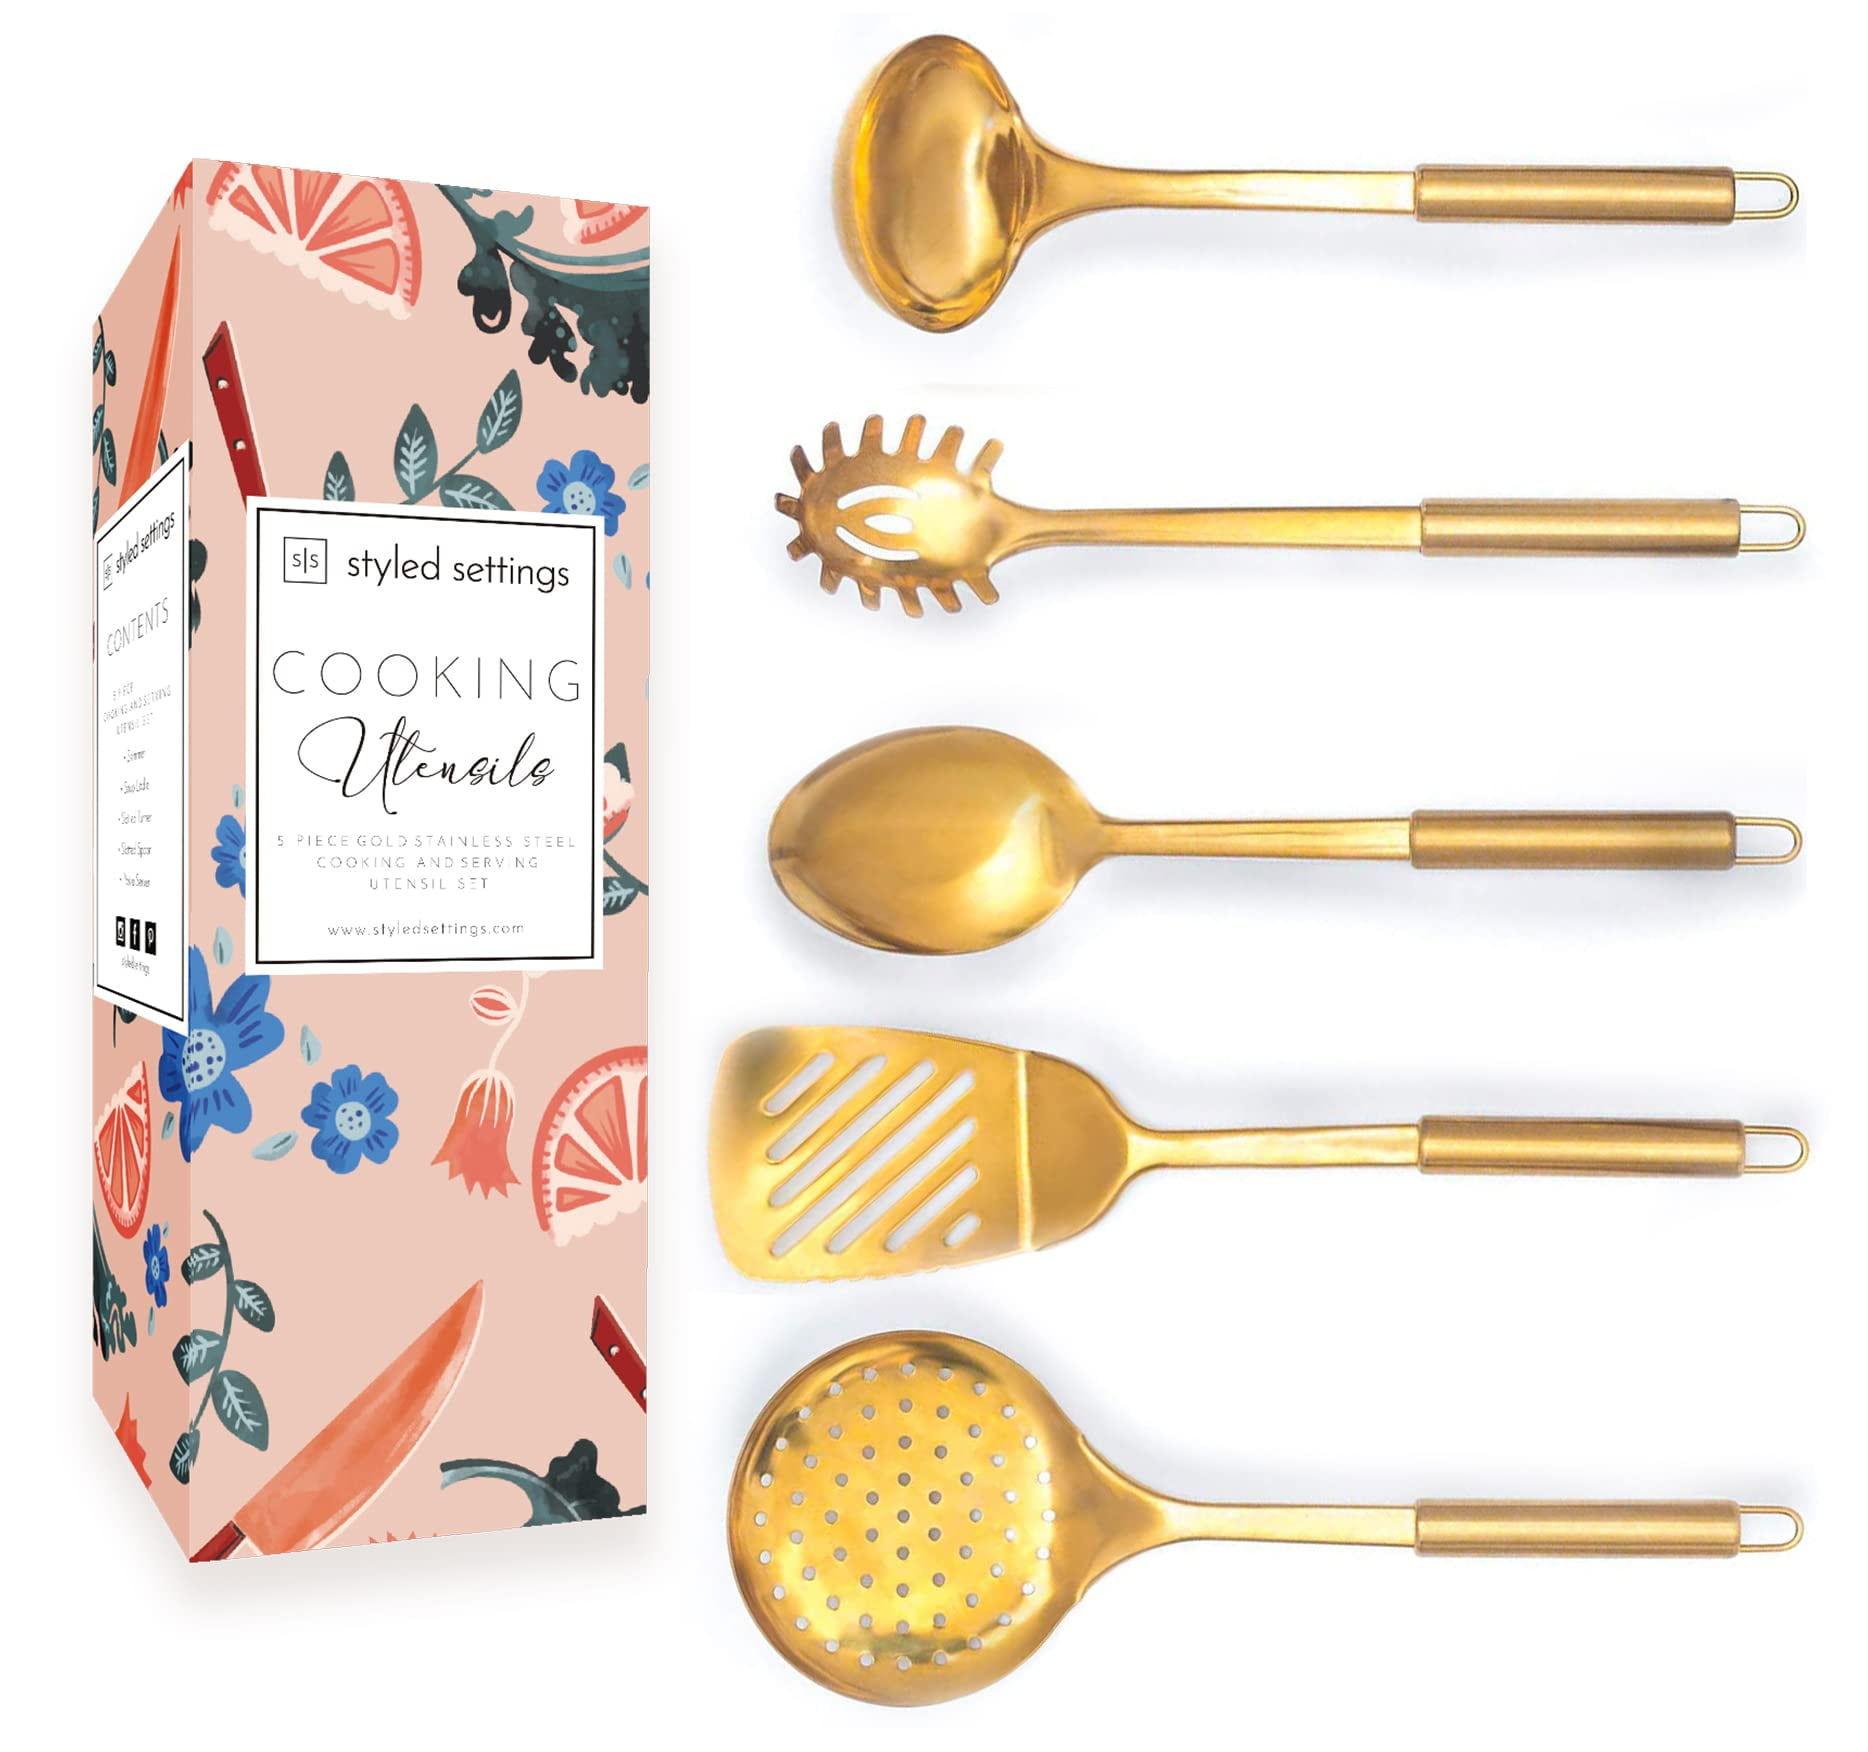 Collfa Rose Gold And Pink Kitchen Utensil Small Five-Piece Set